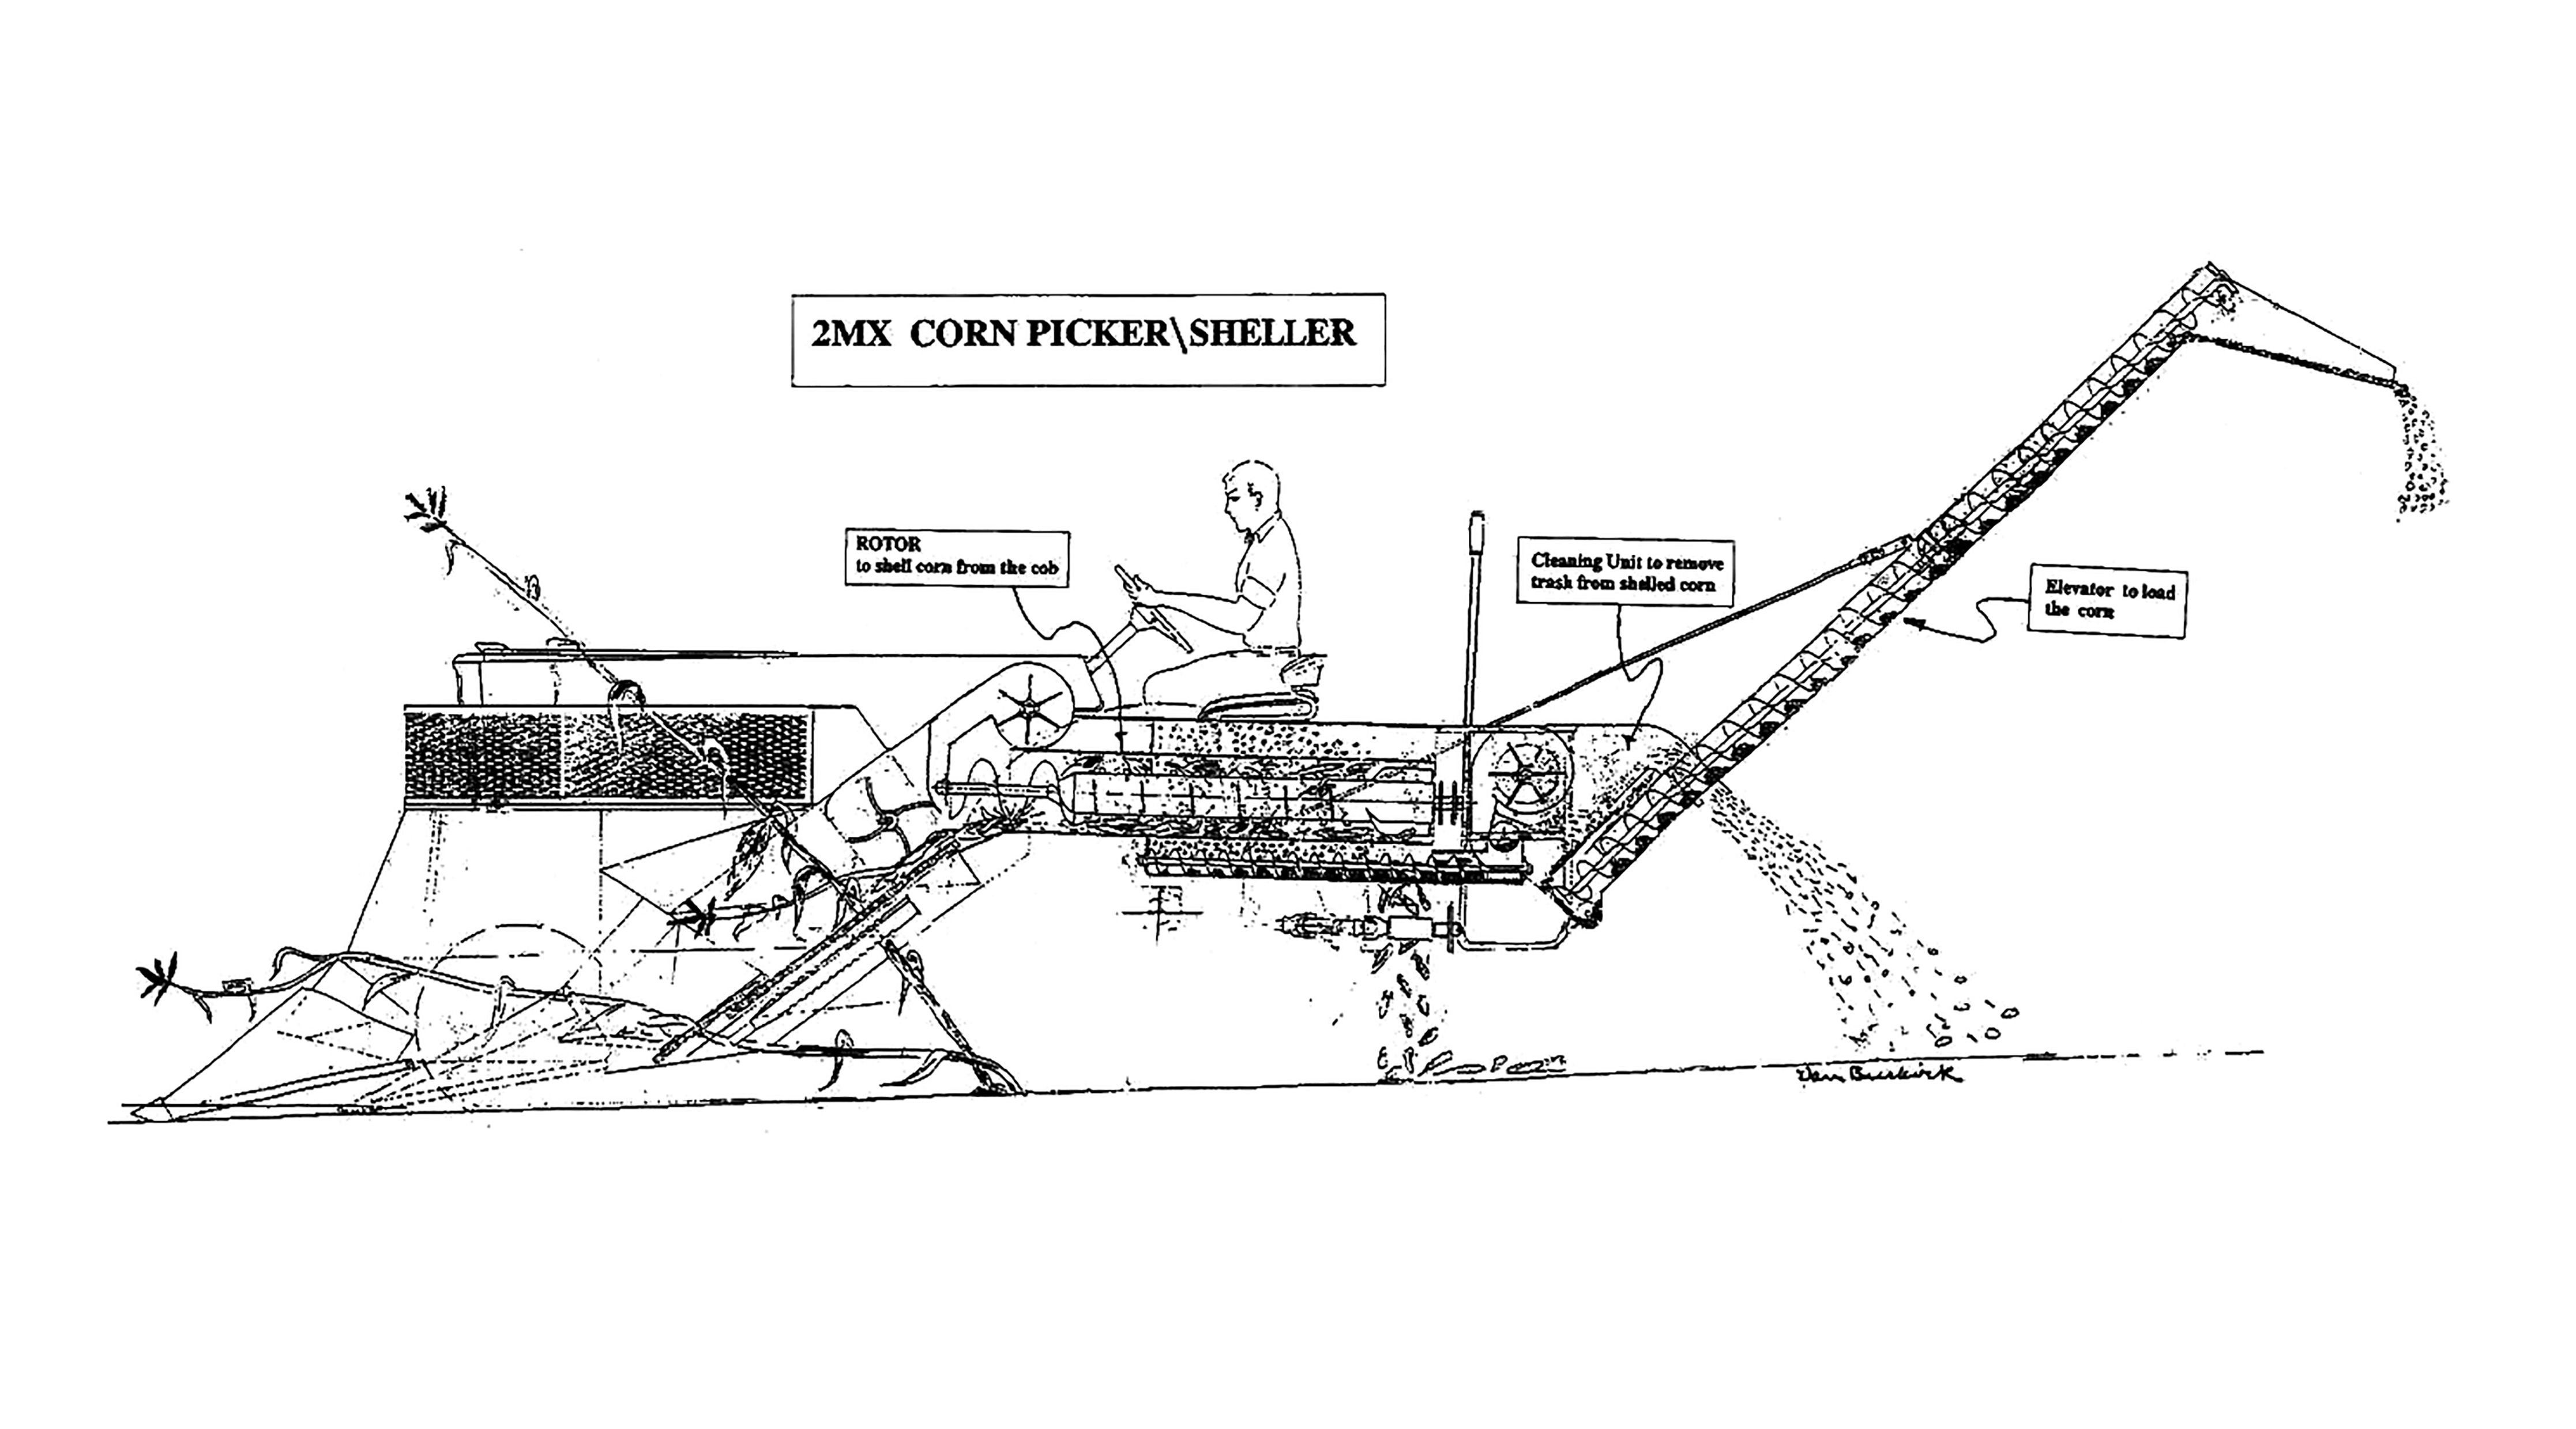 Sketched by Mel Van Buskirk, this machine was designed to use rotary separation to shell corn in the field.